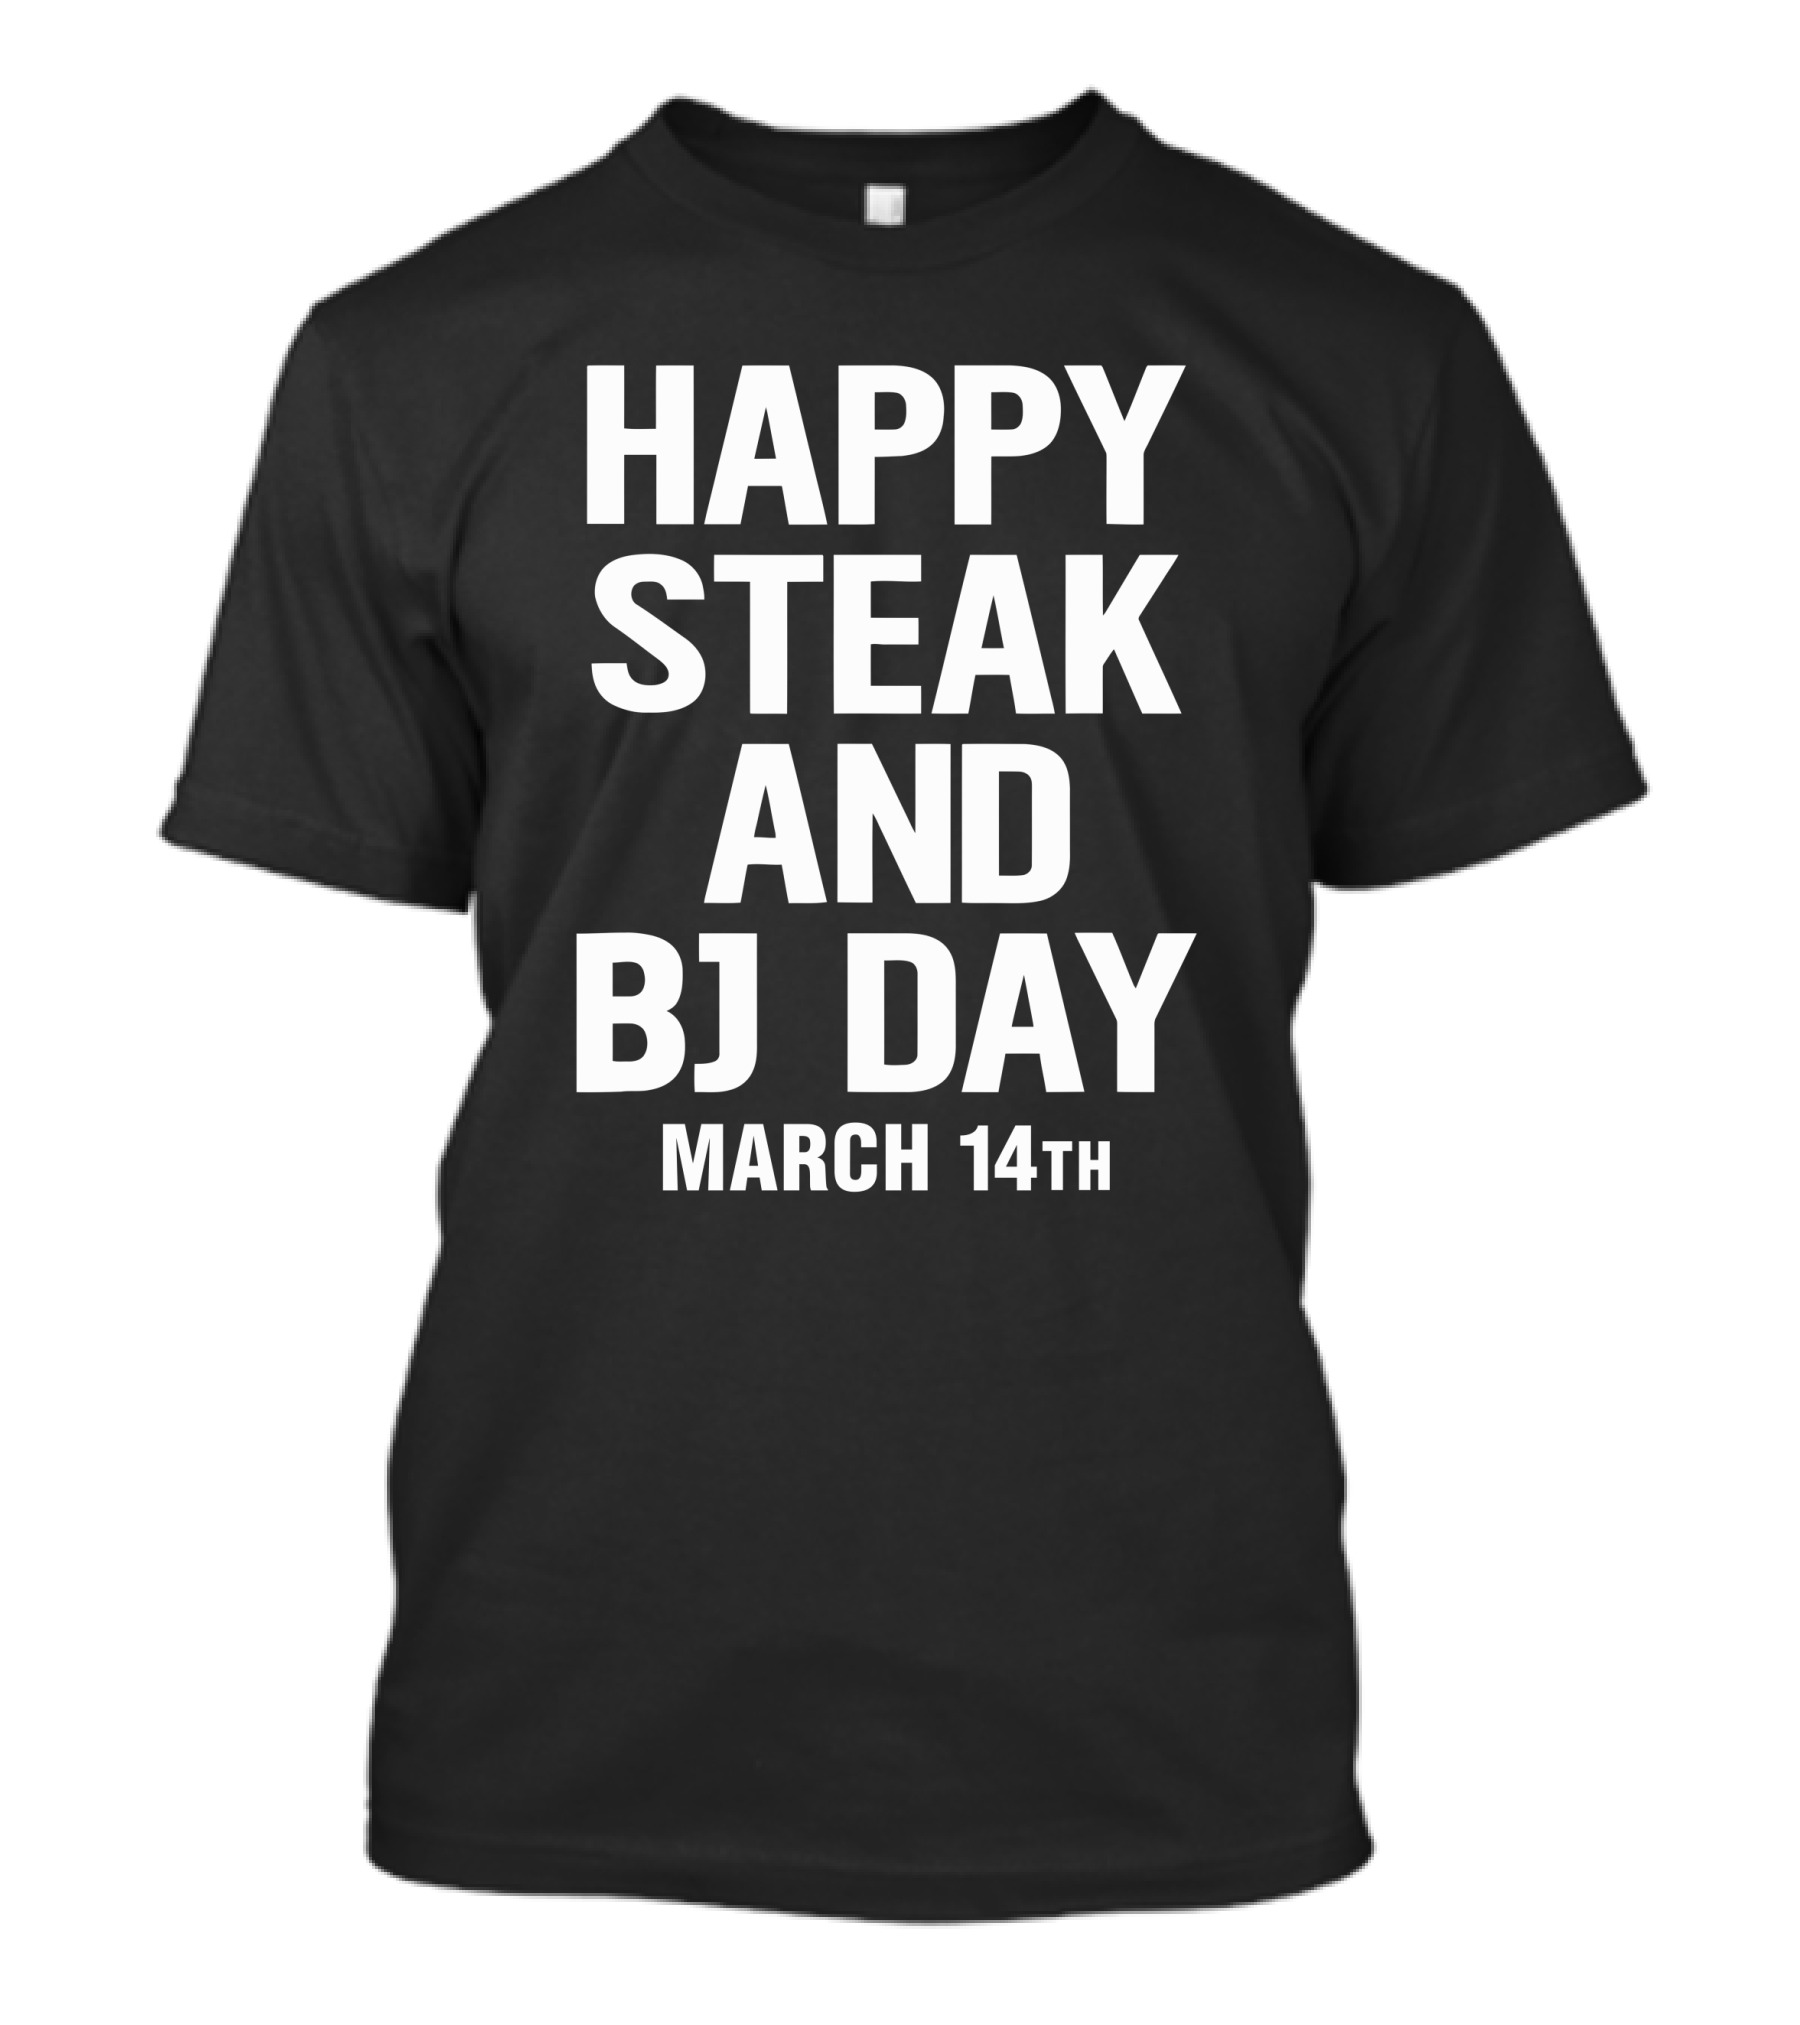 angela hayward add photo steak and bj day images